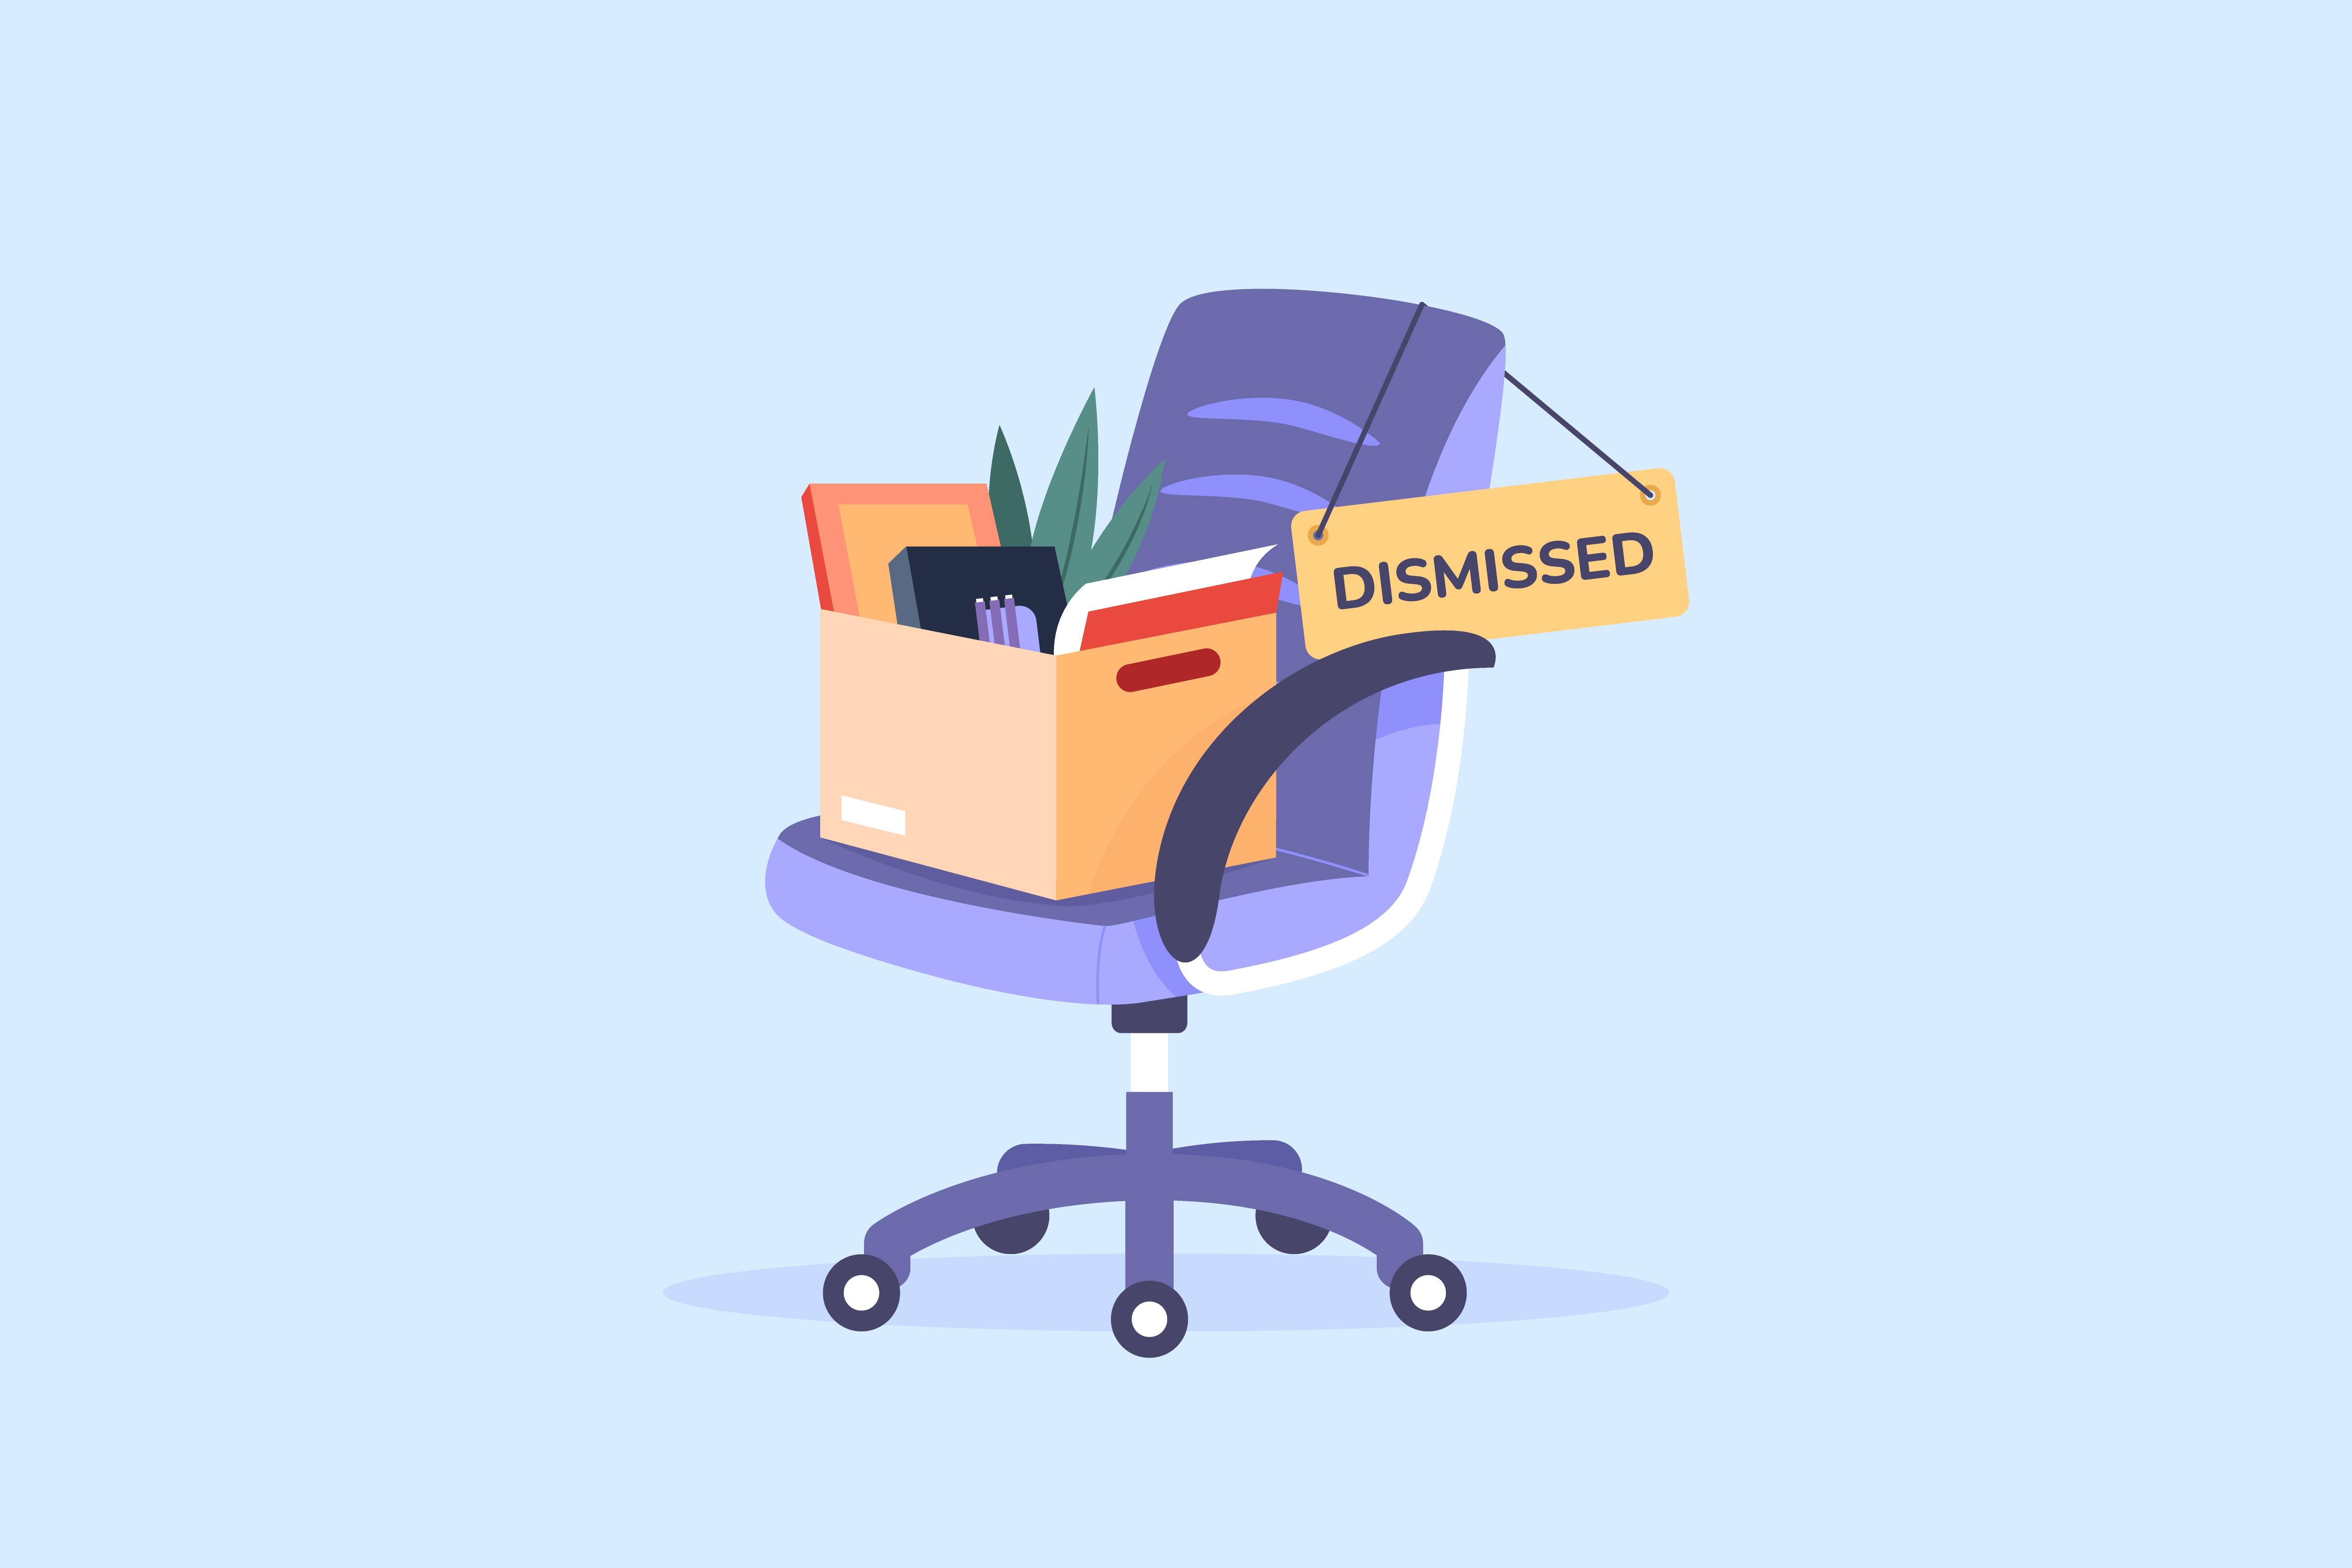 An illustrated image of an office chair covered in a &#039;dismissed&#039; sign